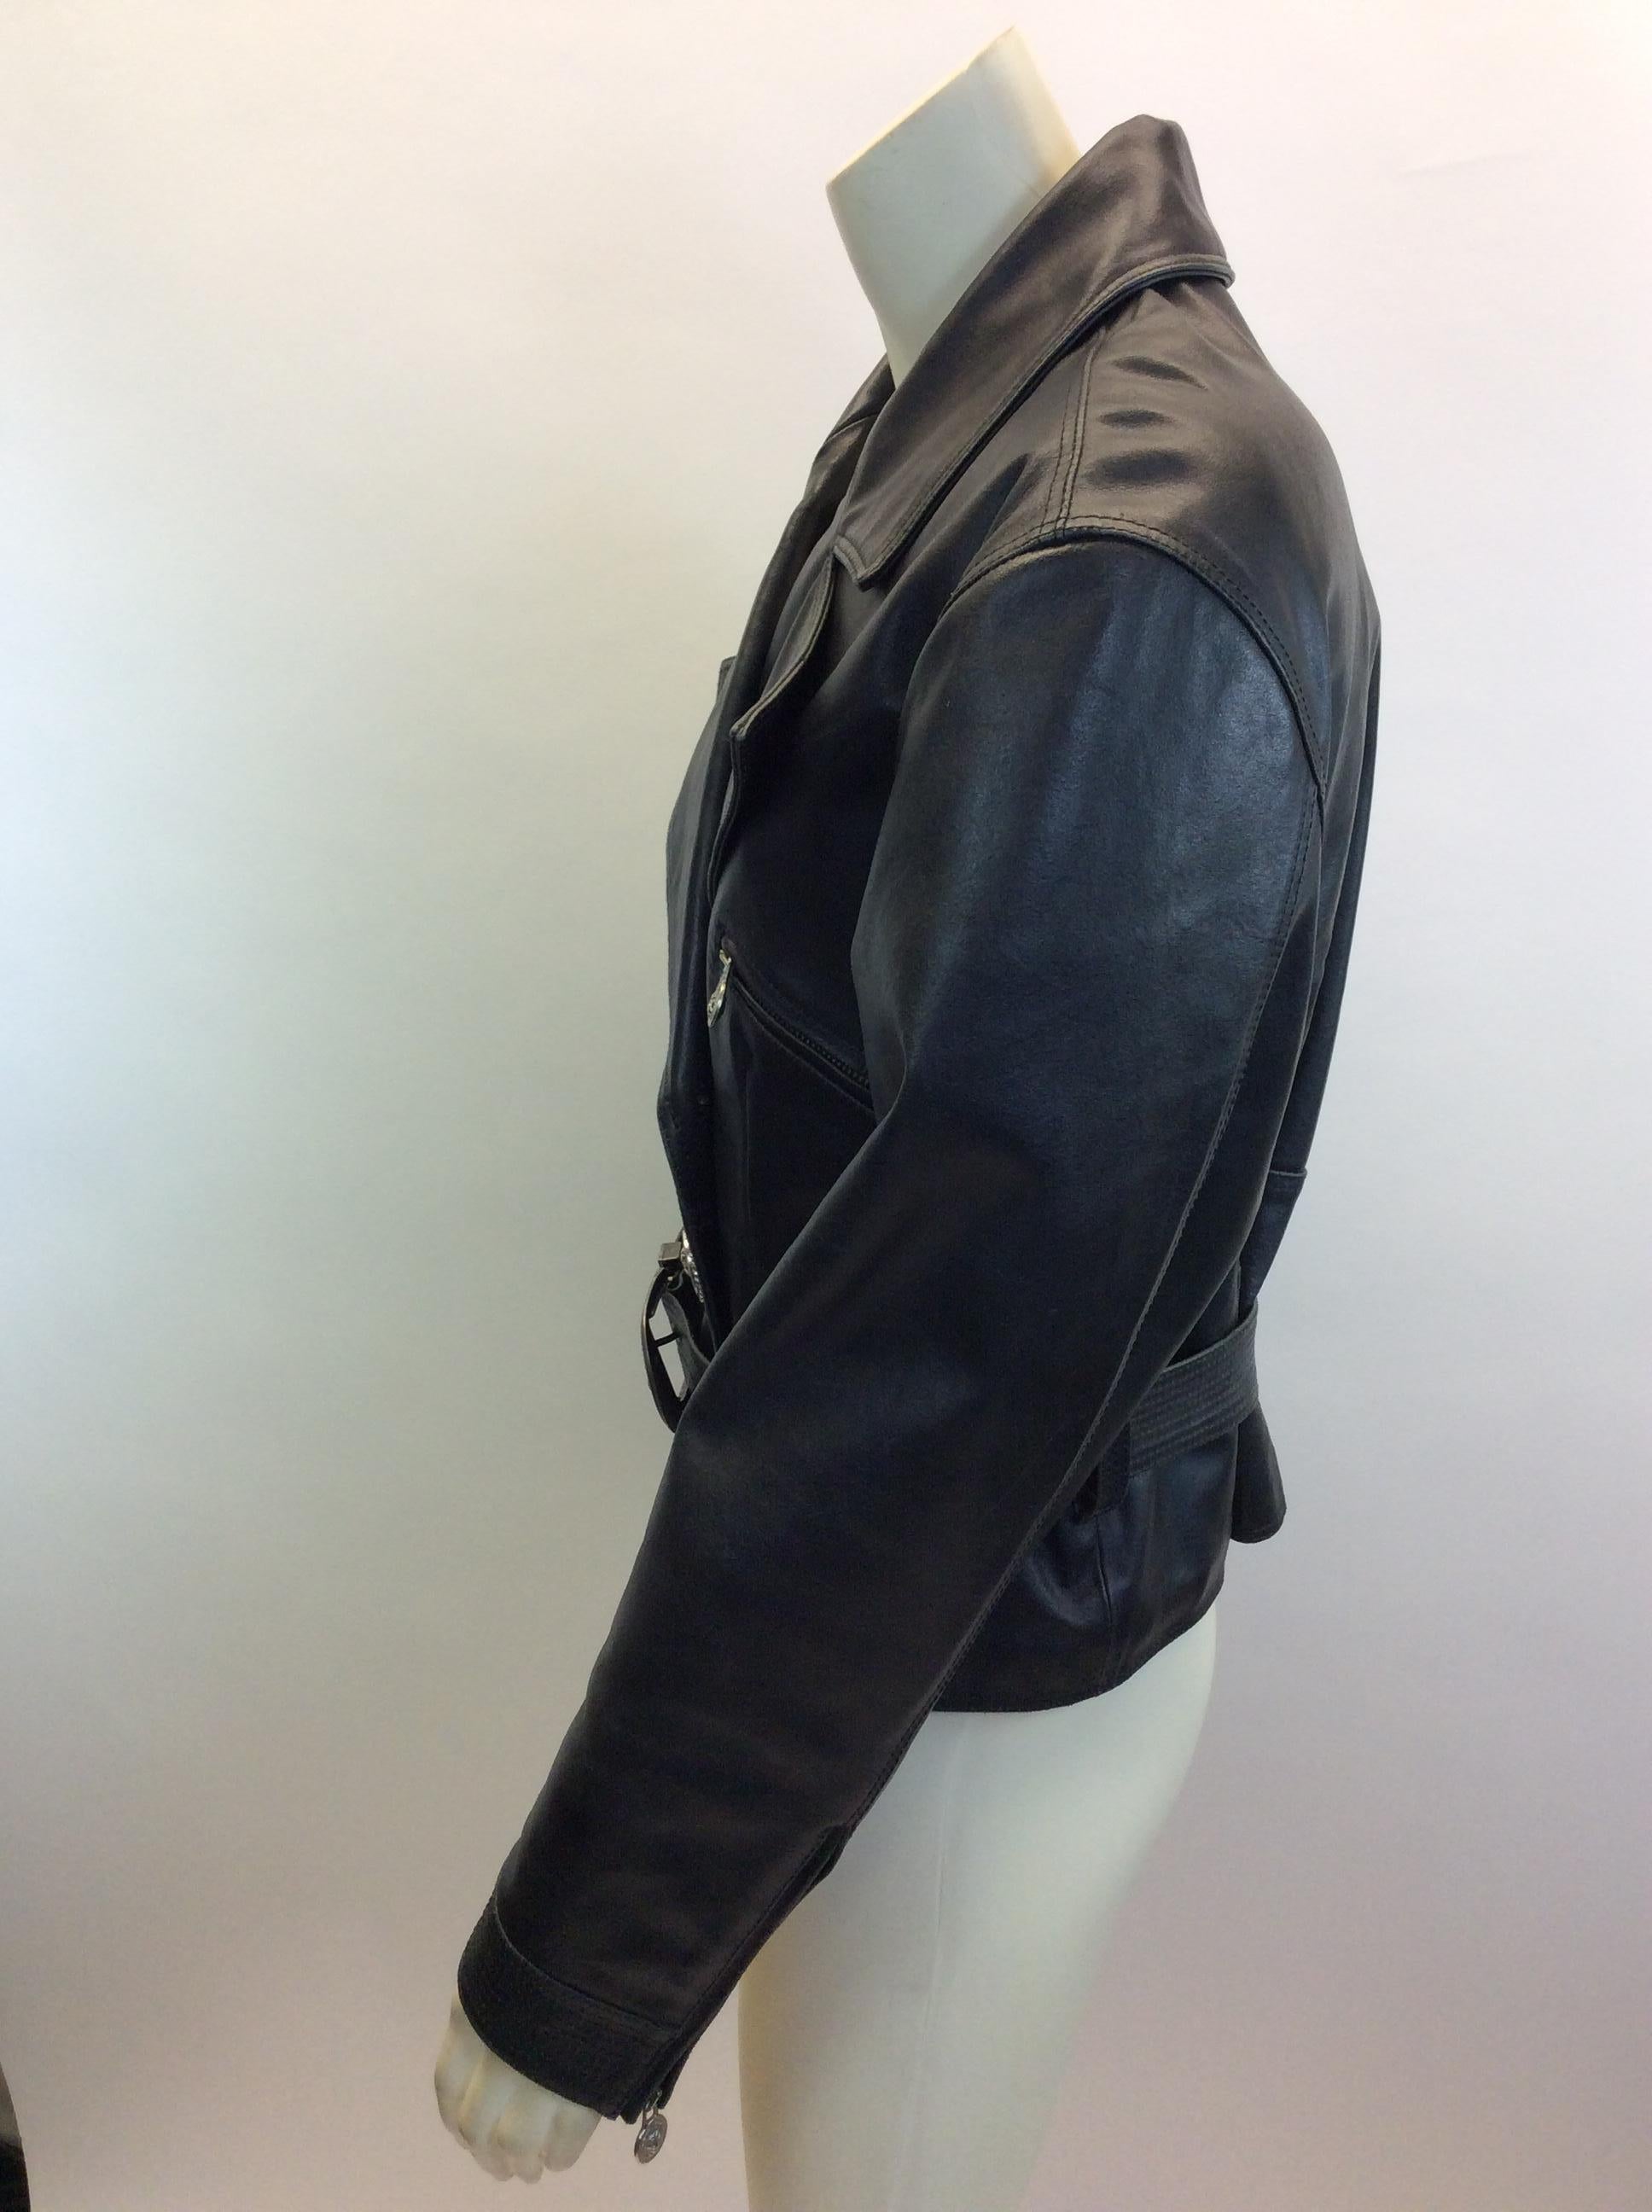 Versace Black Leather Jacket with Silver Buttons
$689
Made in Italy
Leather
Size 44
Length 21